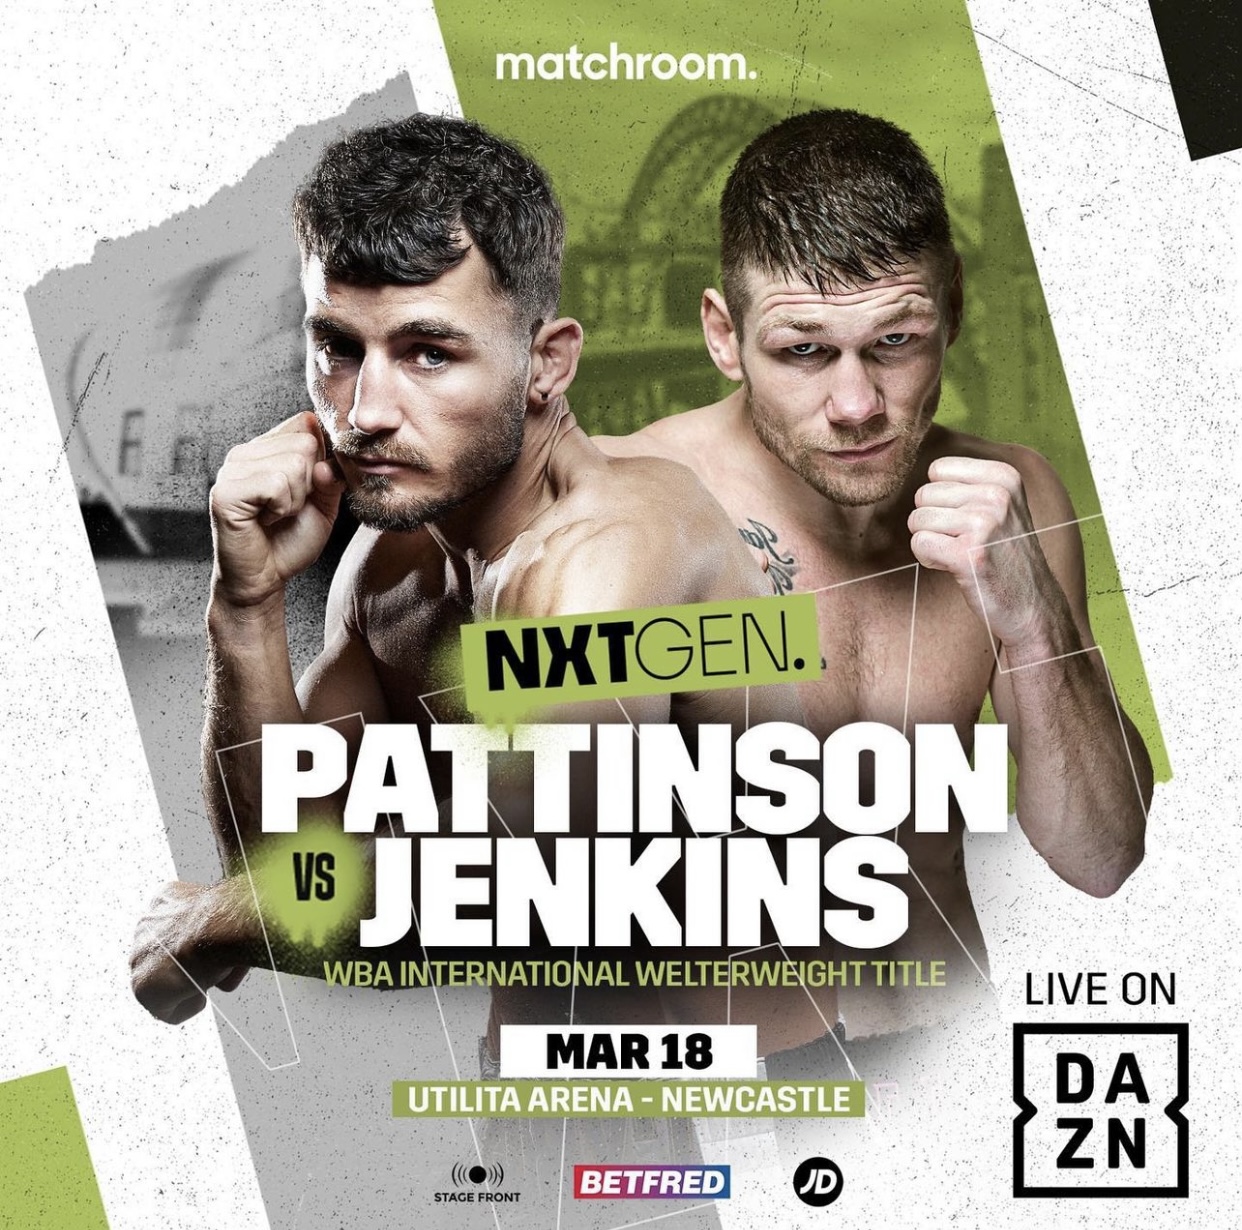 Pattison-Jenkins for the WBA-International welterweight belt on March 18th 